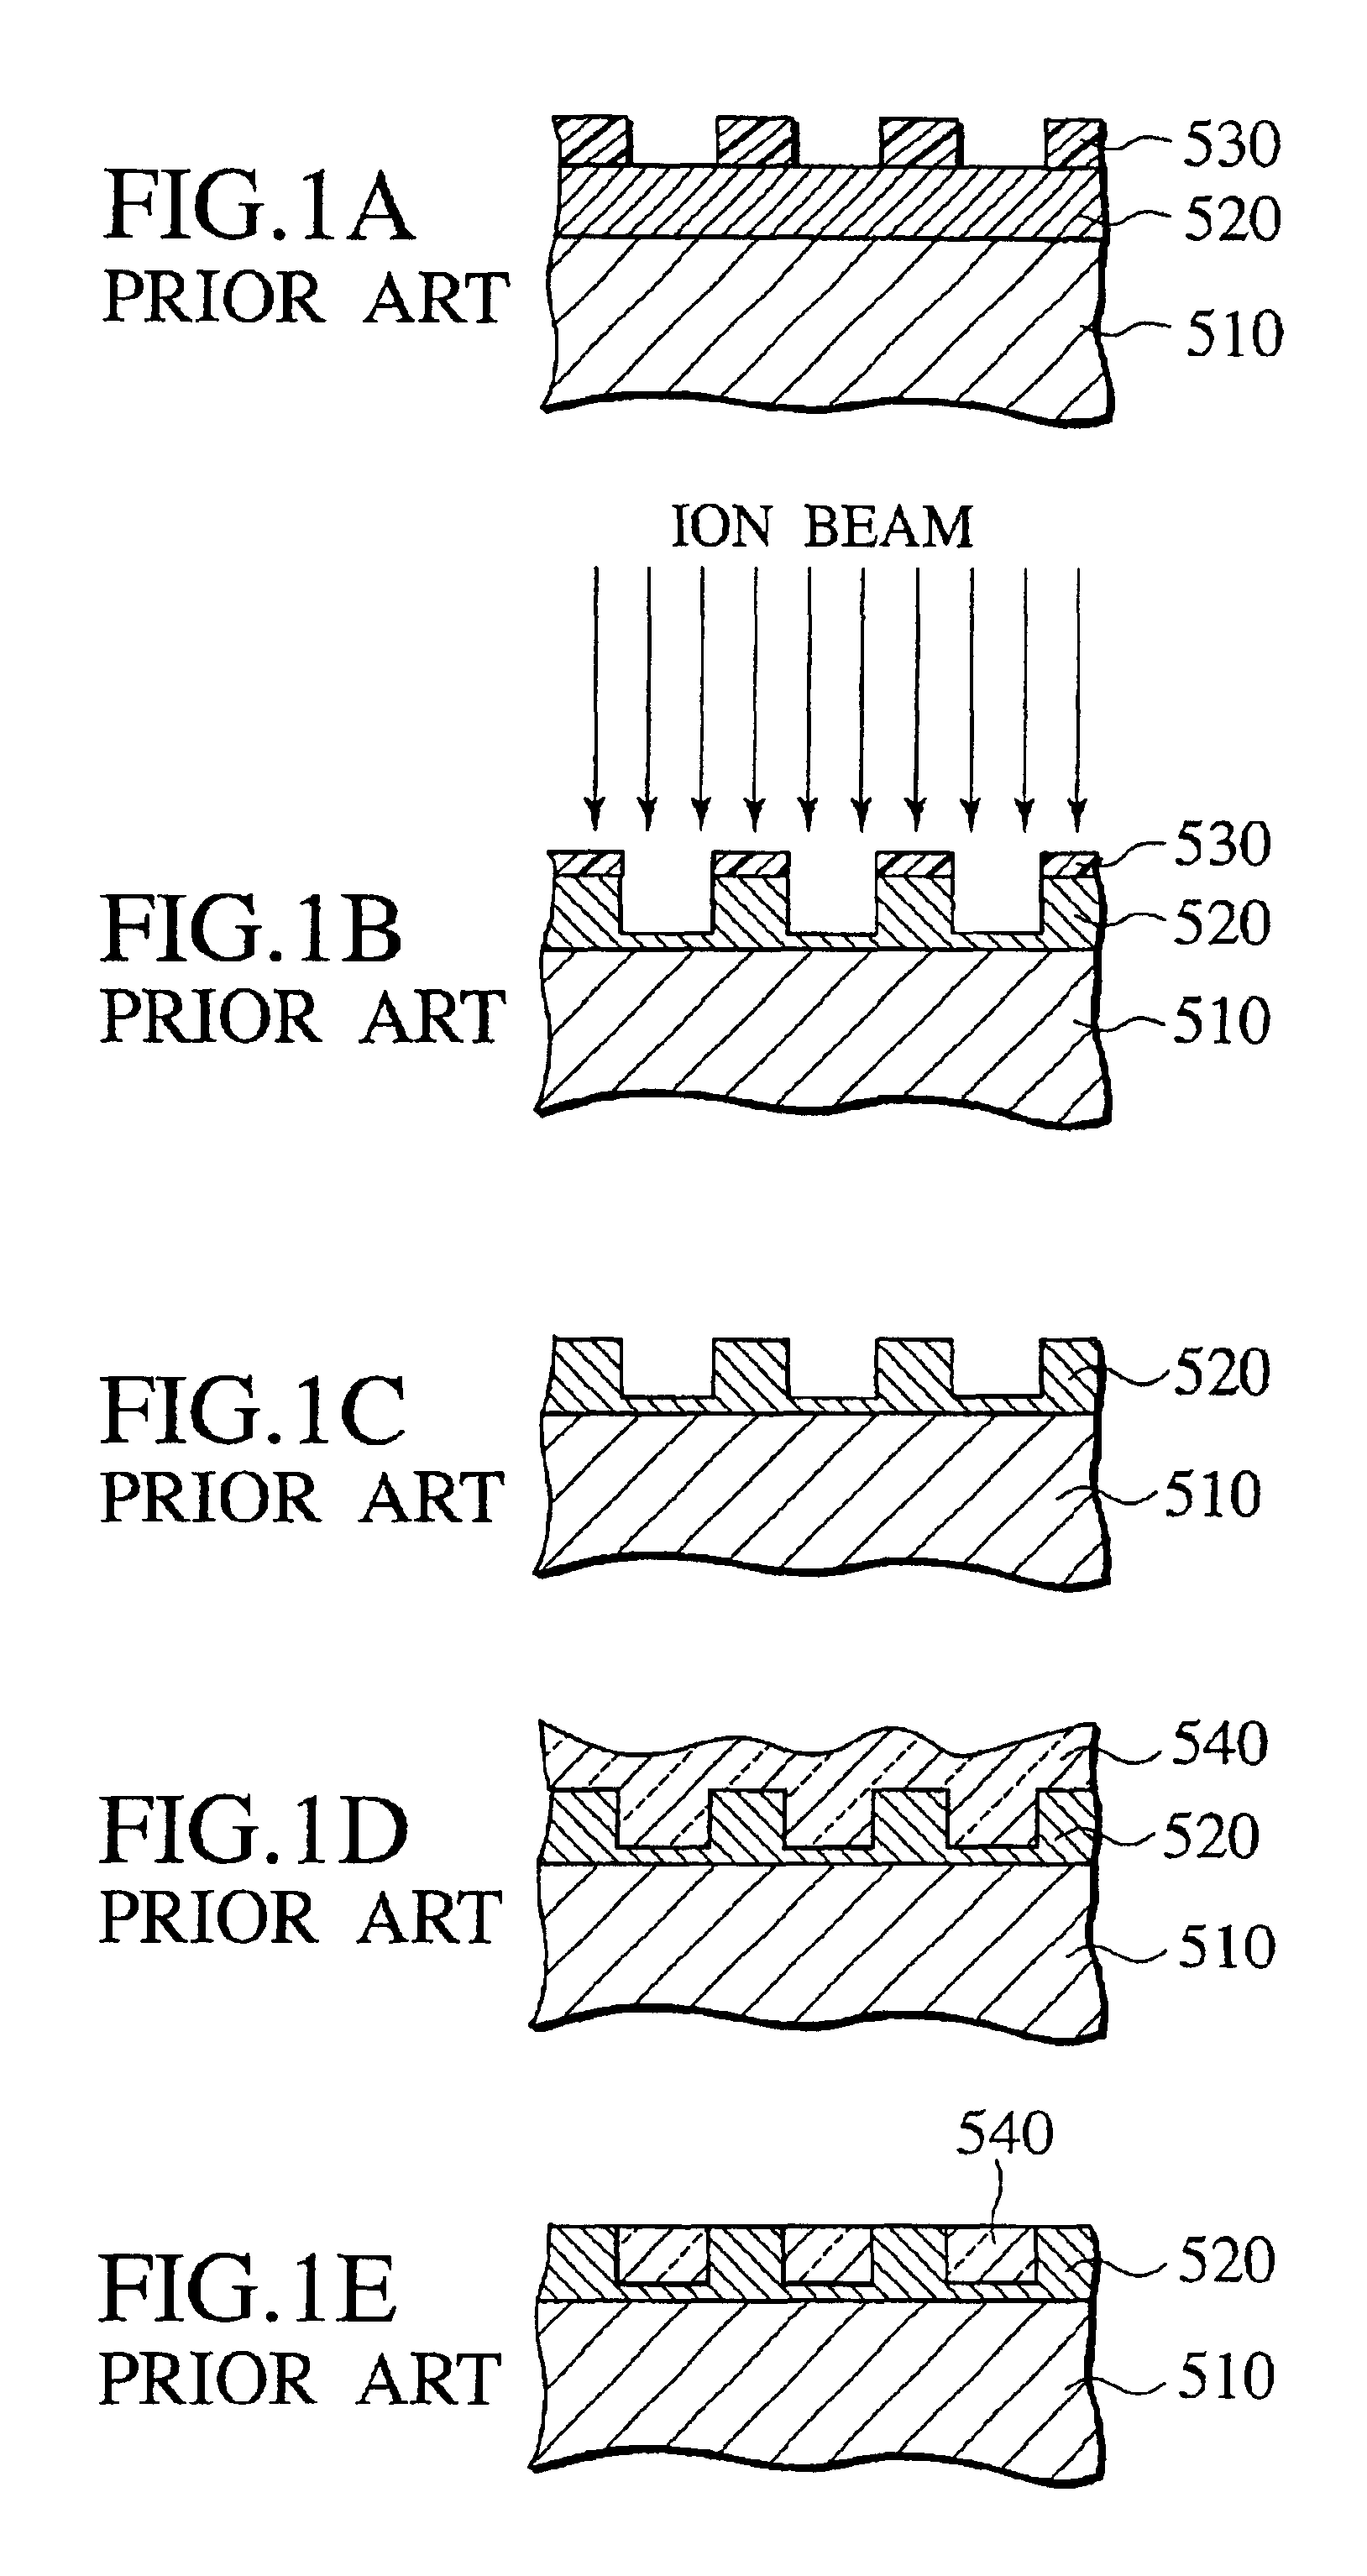 Method of patterning magnetic products using chemical reactions